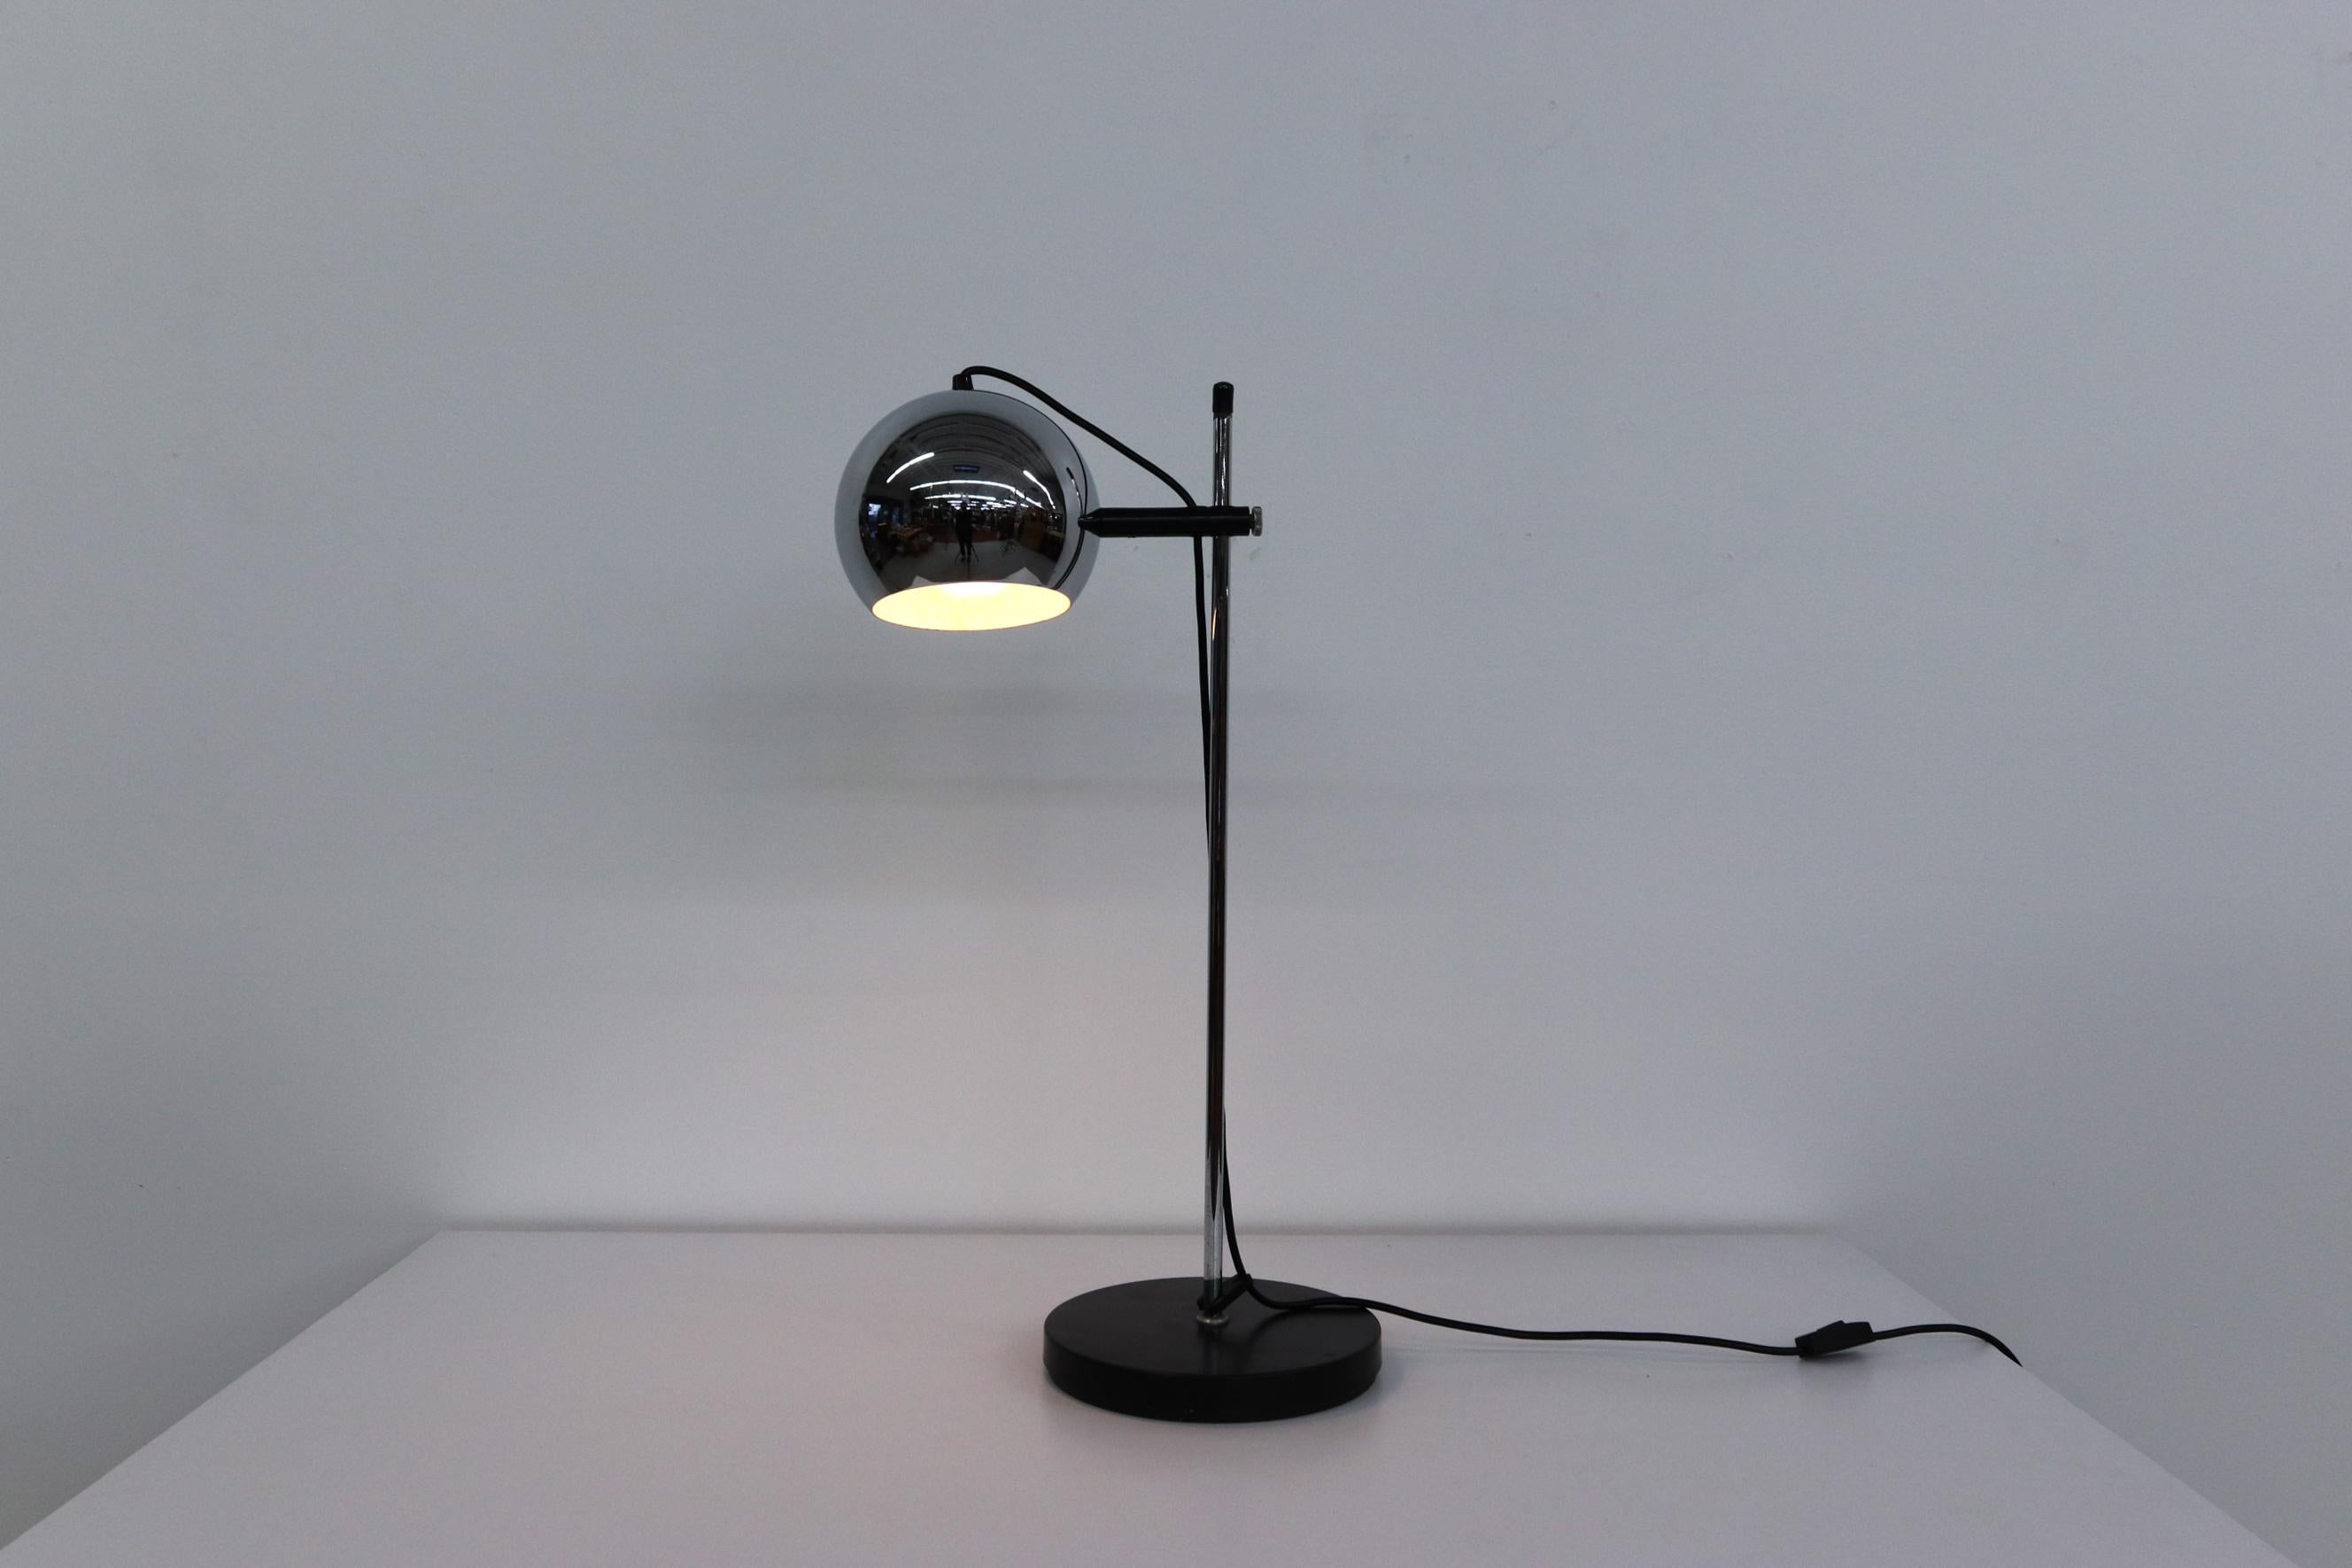 Mid century, Gepo (attr) chome globe table lamp with black base. Adjustable height and rotating globe. In original condition with visible wear consistent with age and use.